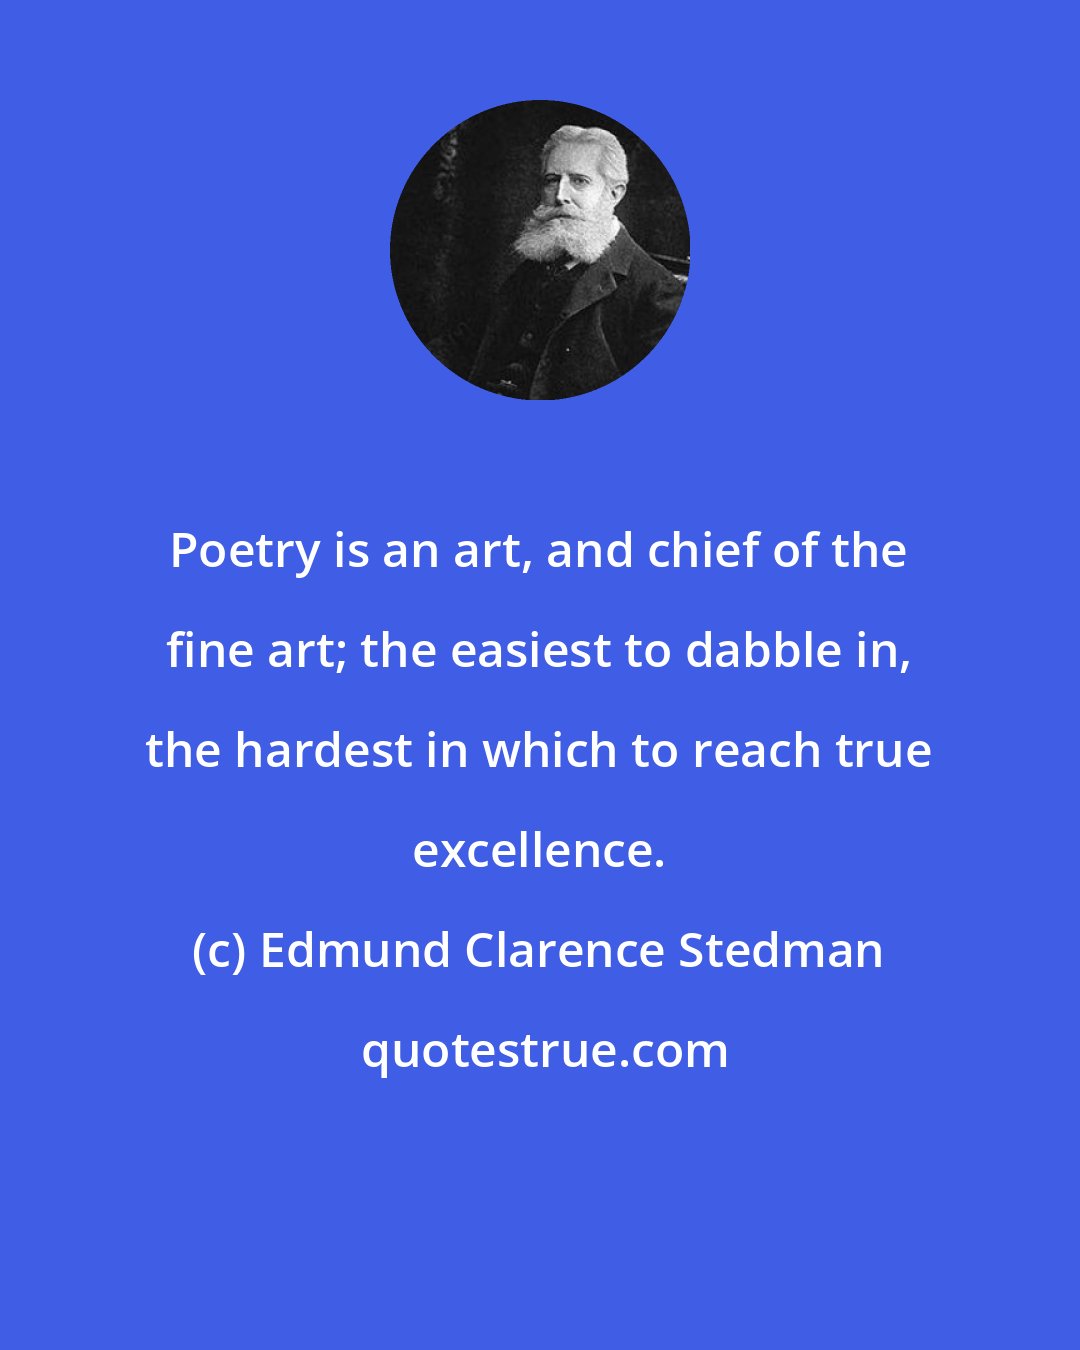 Edmund Clarence Stedman: Poetry is an art, and chief of the fine art; the easiest to dabble in, the hardest in which to reach true excellence.